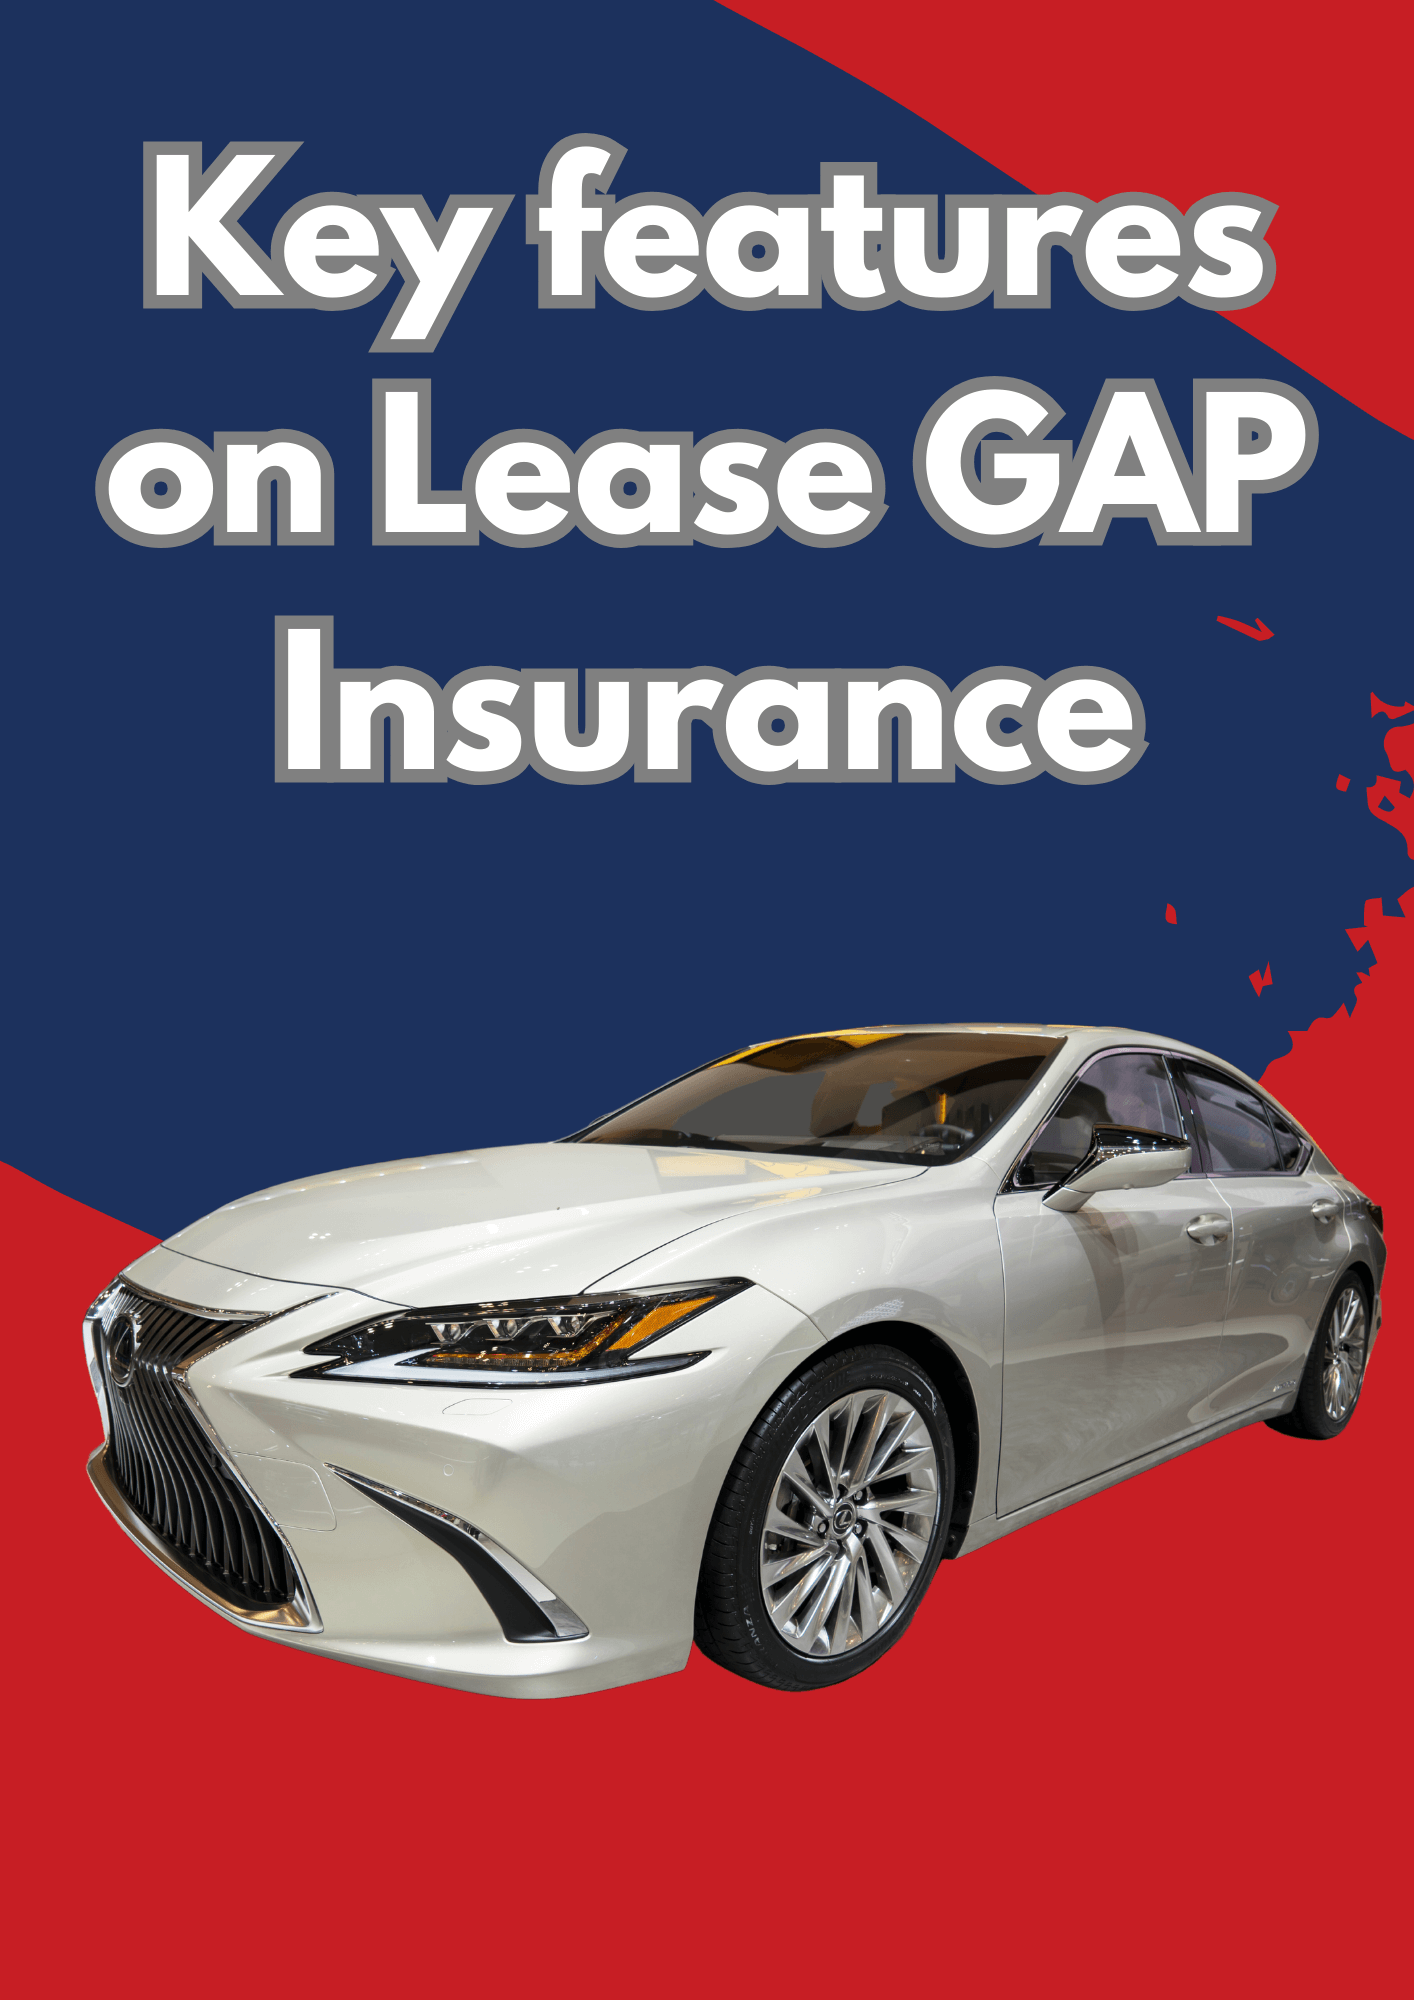 Lease GAP Insurance key features